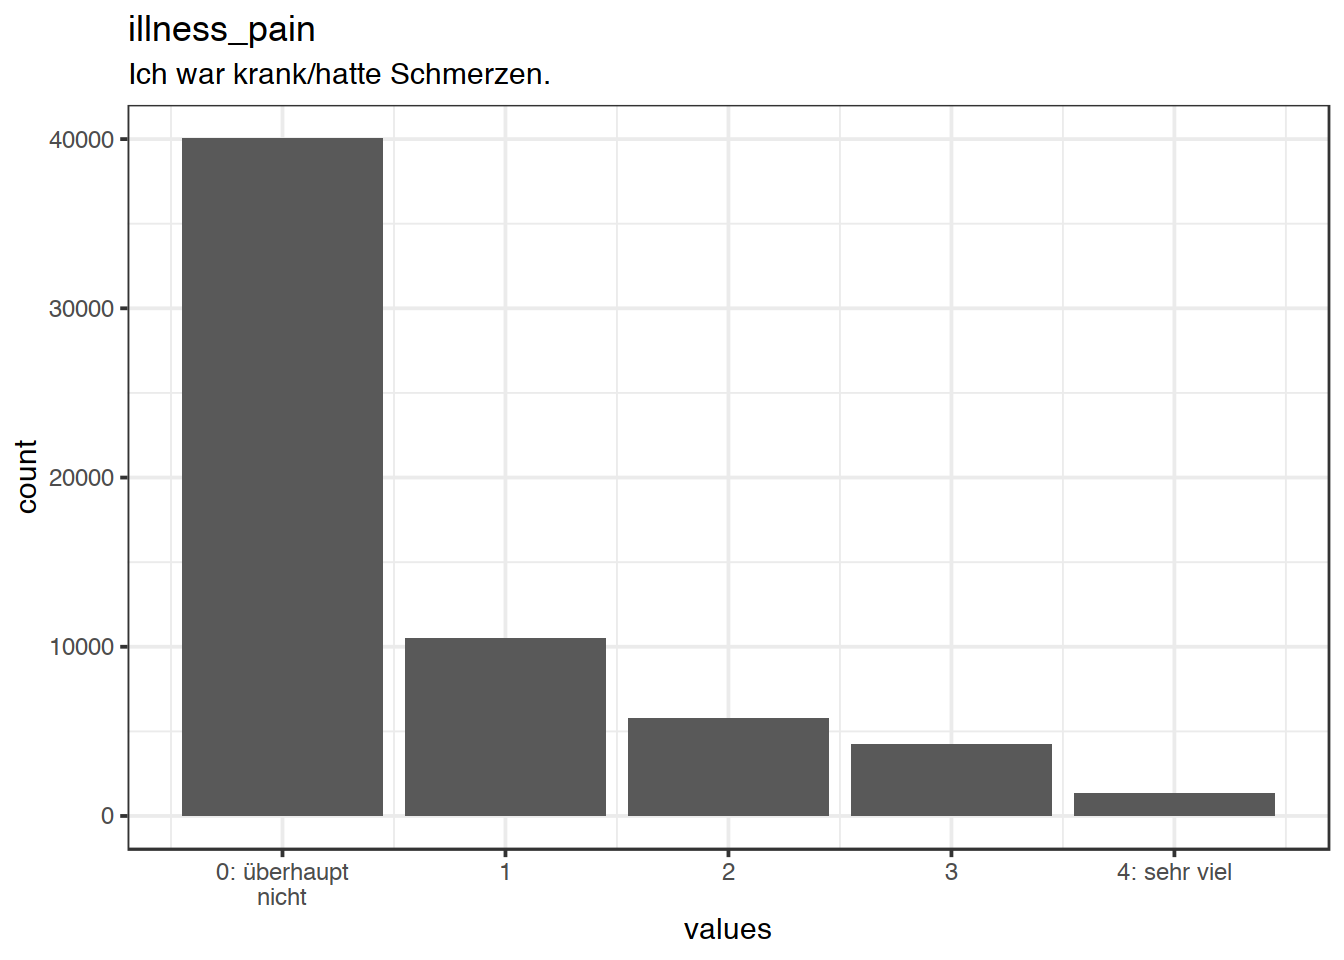 Distribution of values for illness_pain